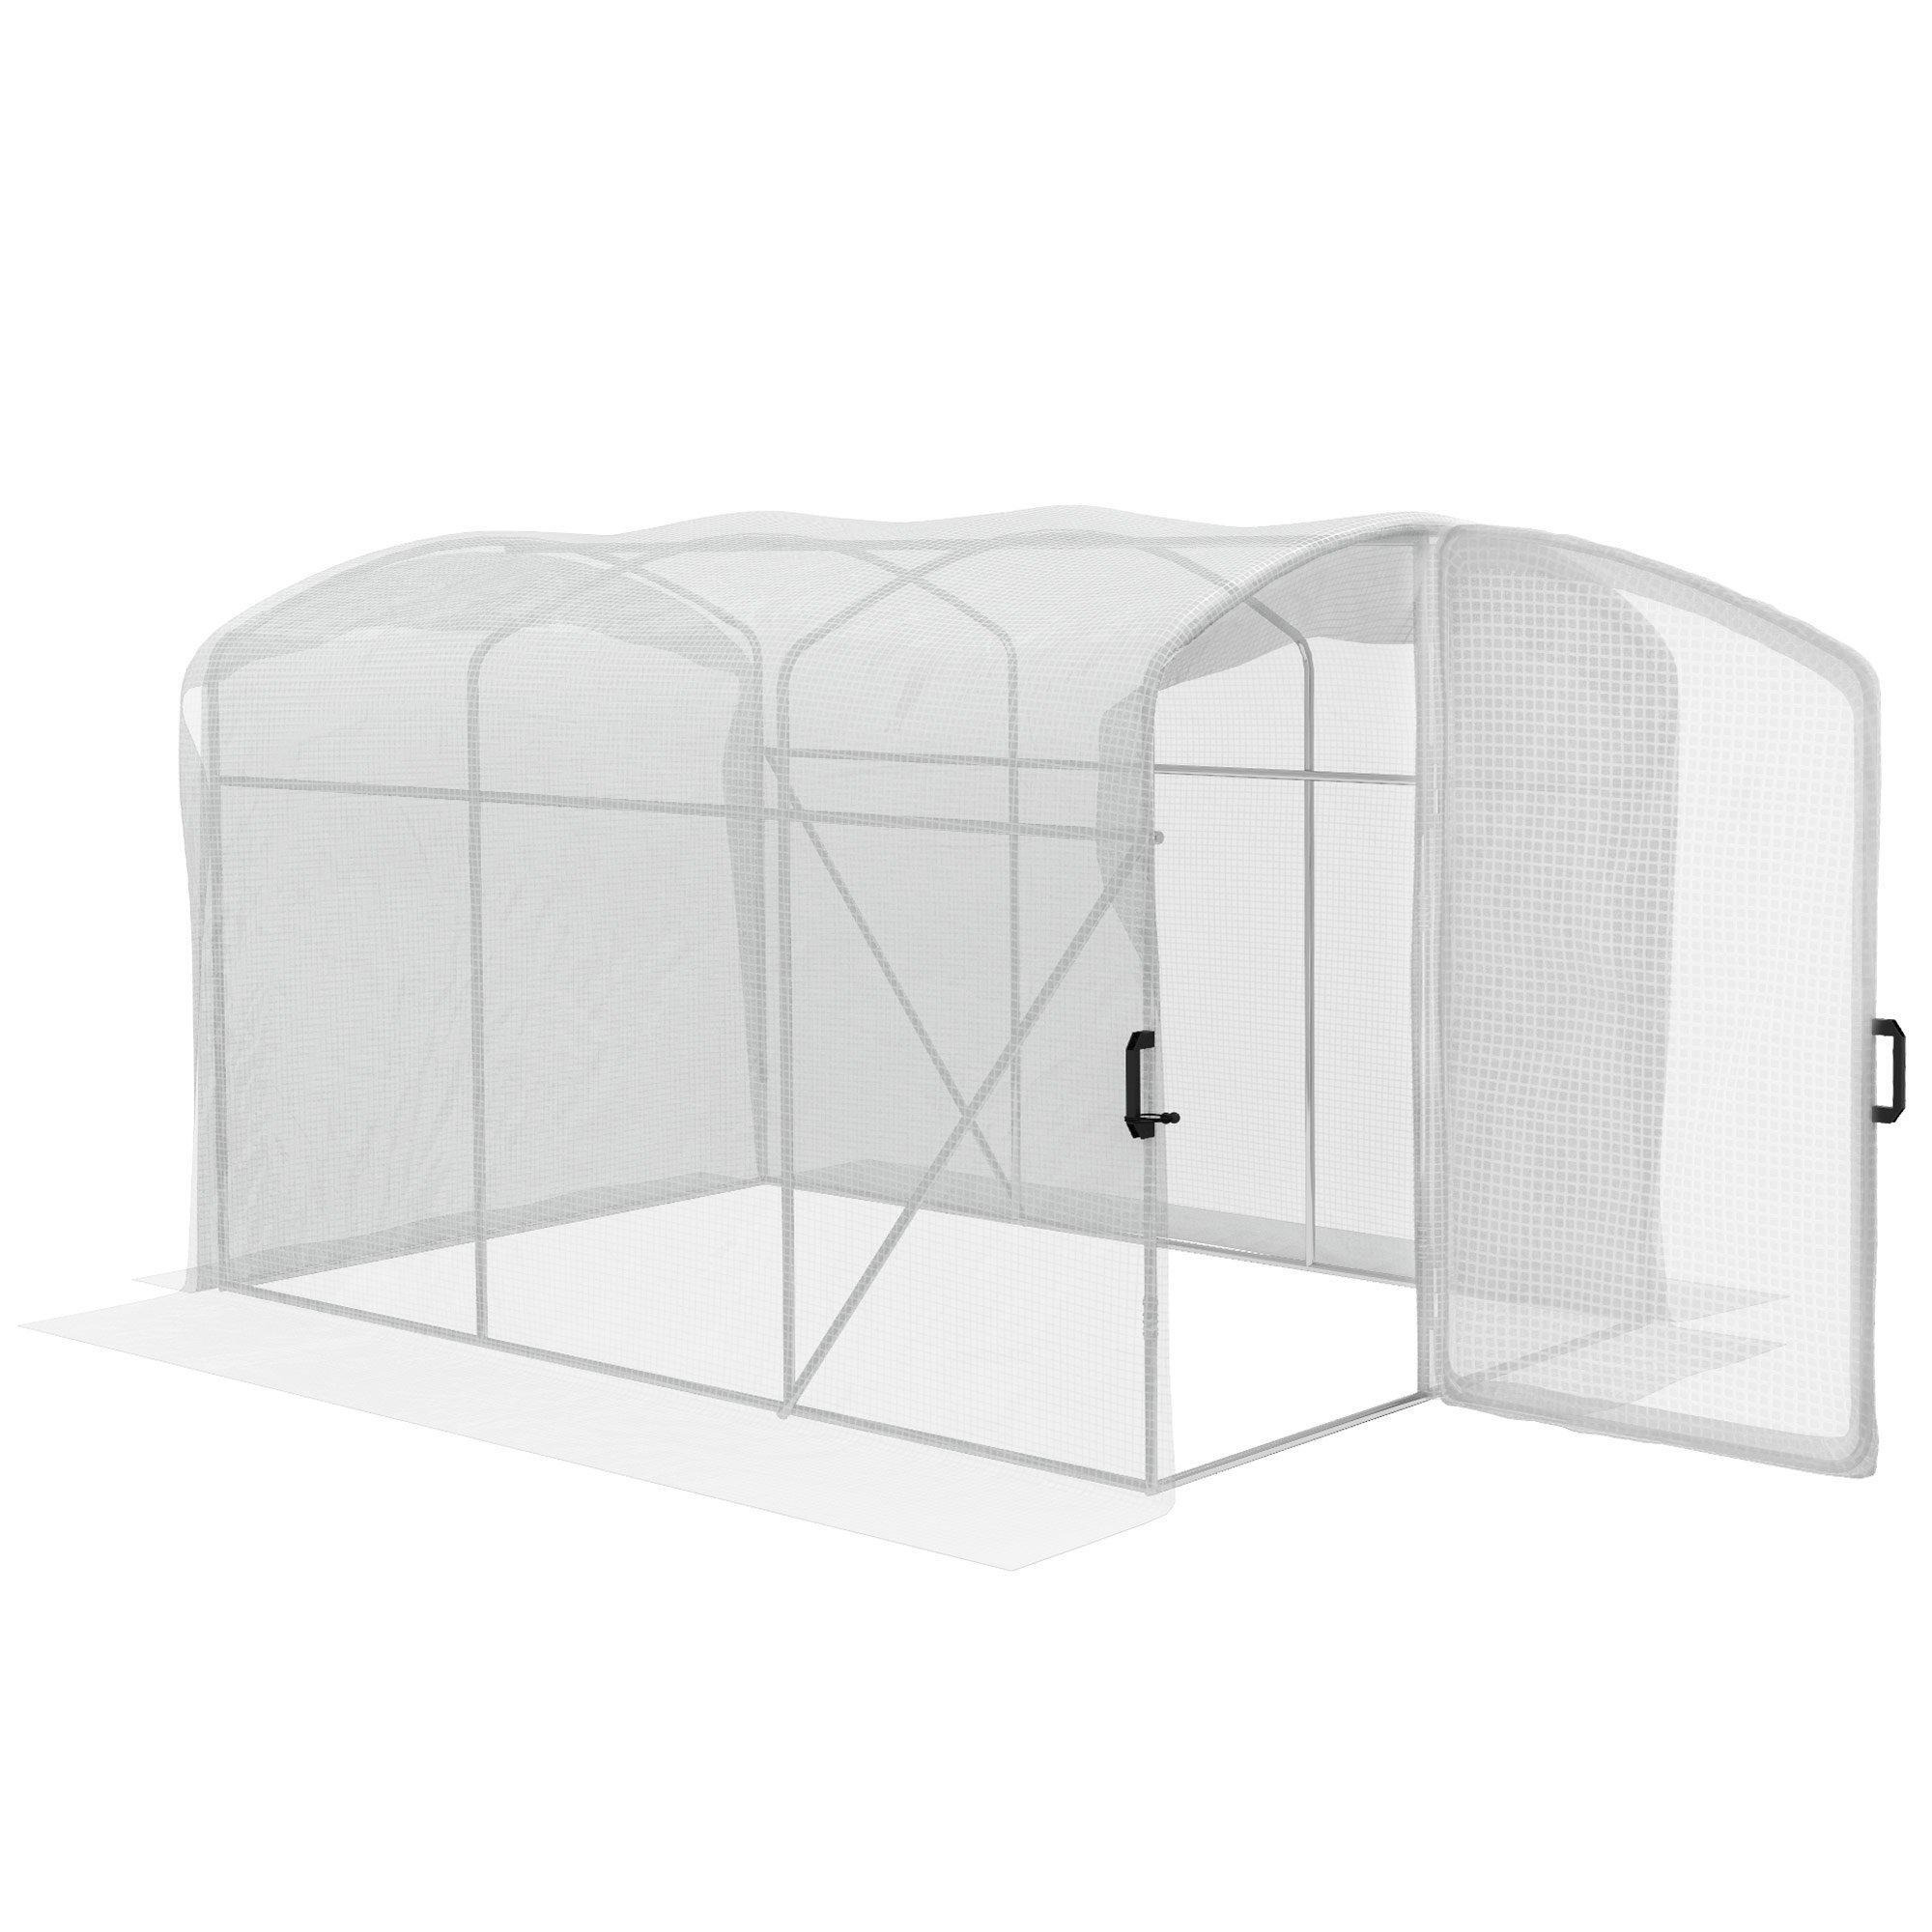 Polytunnel Greenhouse with PE Cover, Walk-in Grow House, 3 x 2 x 2m - image 1